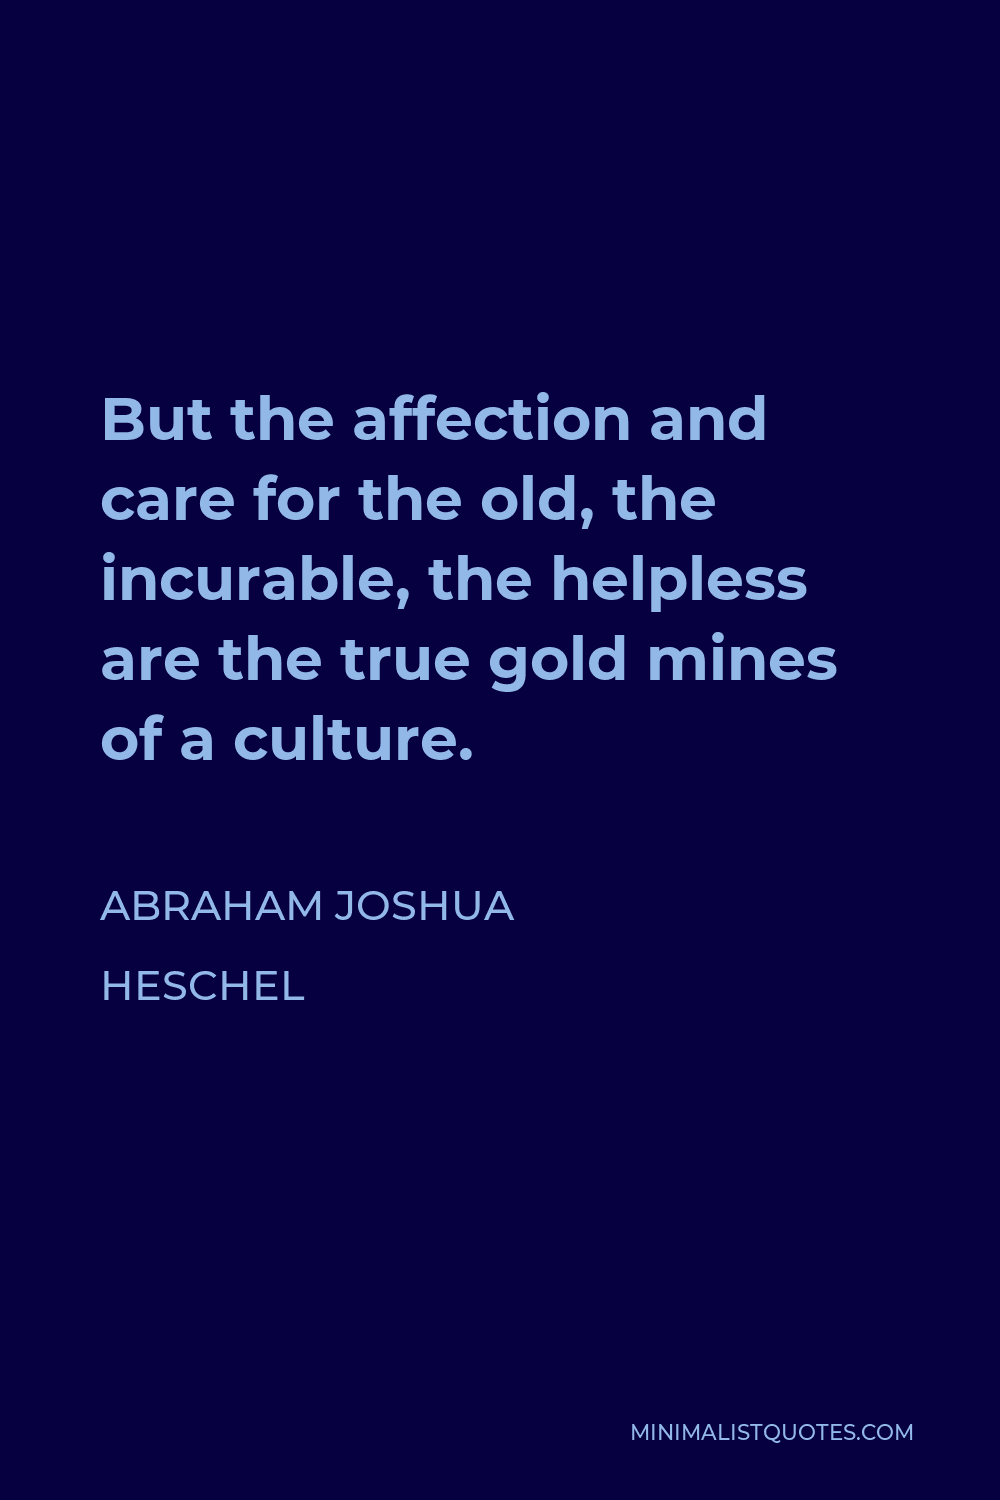 Abraham Joshua Heschel Quote - But the affection and care for the old, the incurable, the helpless are the true gold mines of a culture.